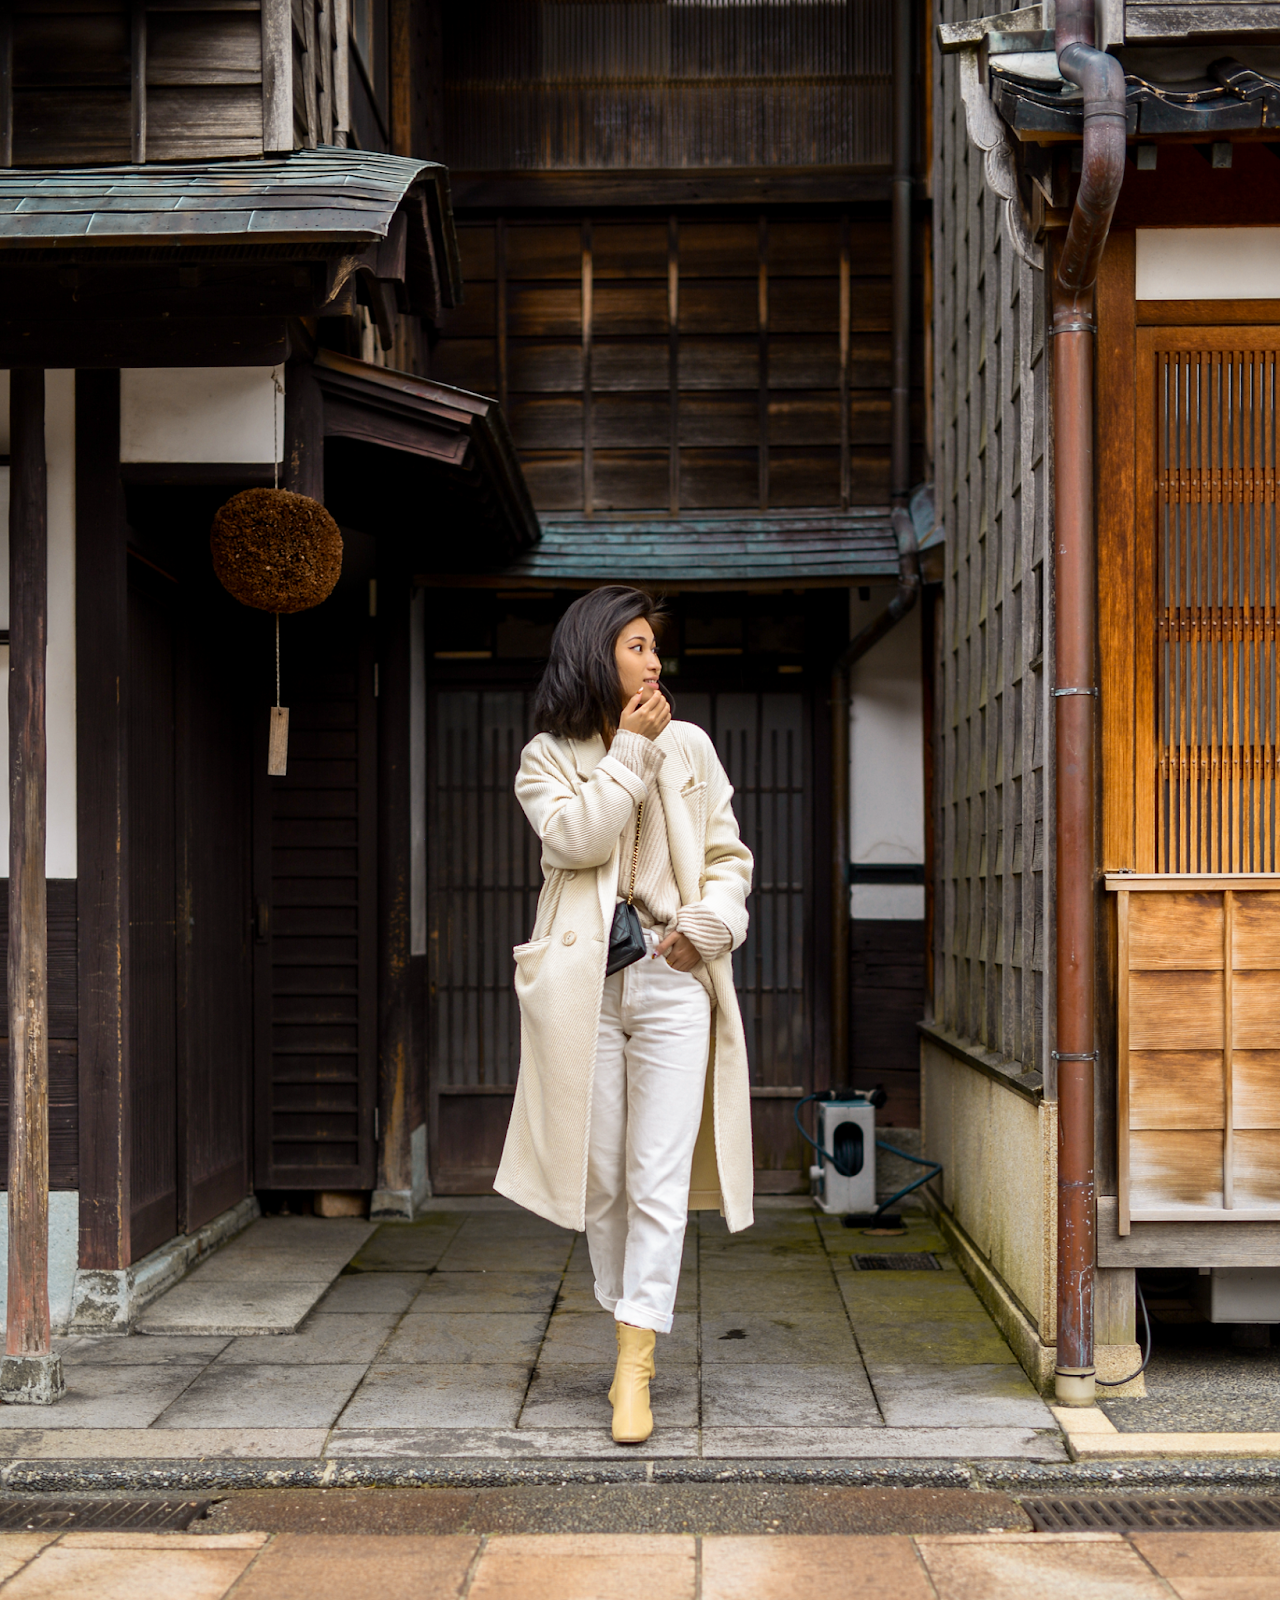 Dress for Kanazawa, Japan Travel Outfit Ideas, Kanazawa trip from Tokyo, must-visit cities in Japan, Nishi Chaya District, photogenic and charming towns in Japan - FOREVERVANNY